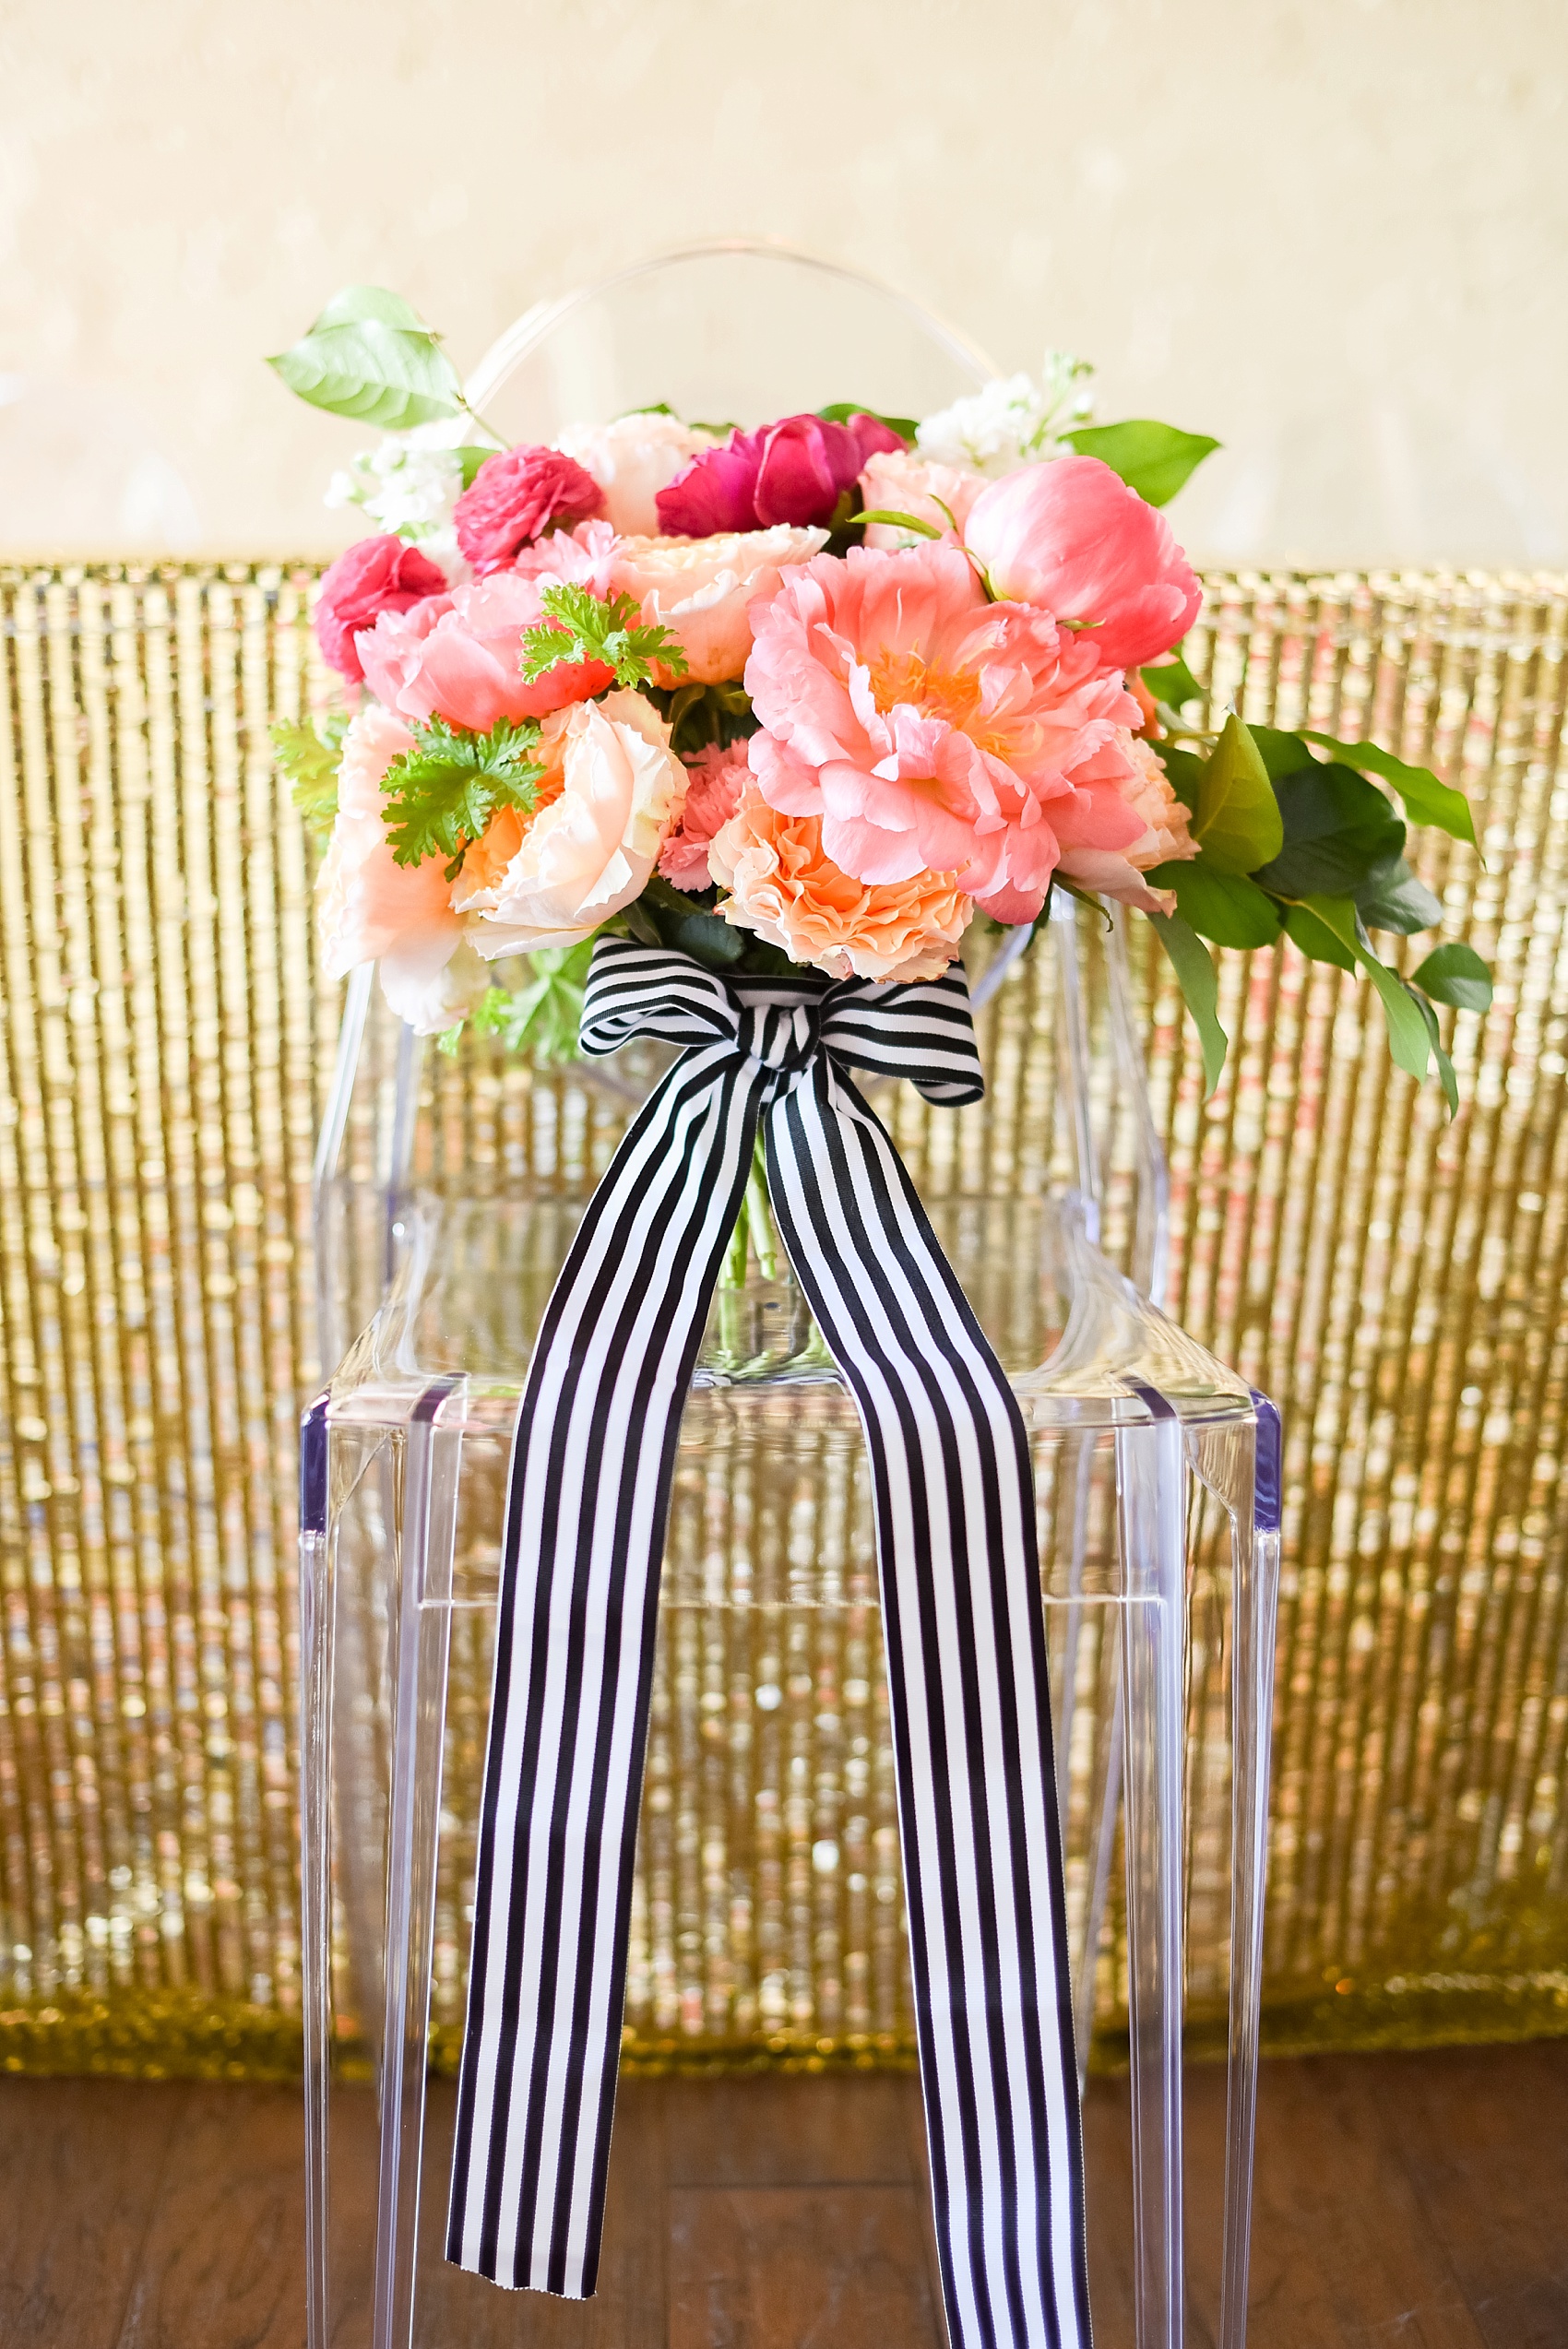 Modern pink and orange wedding ideas with colorful bouquet and black and white striped ribbon. Gold sequin linens round it out! Photos by Mikkel Paige photography, planning by Ashton Events and Every Last Detail.